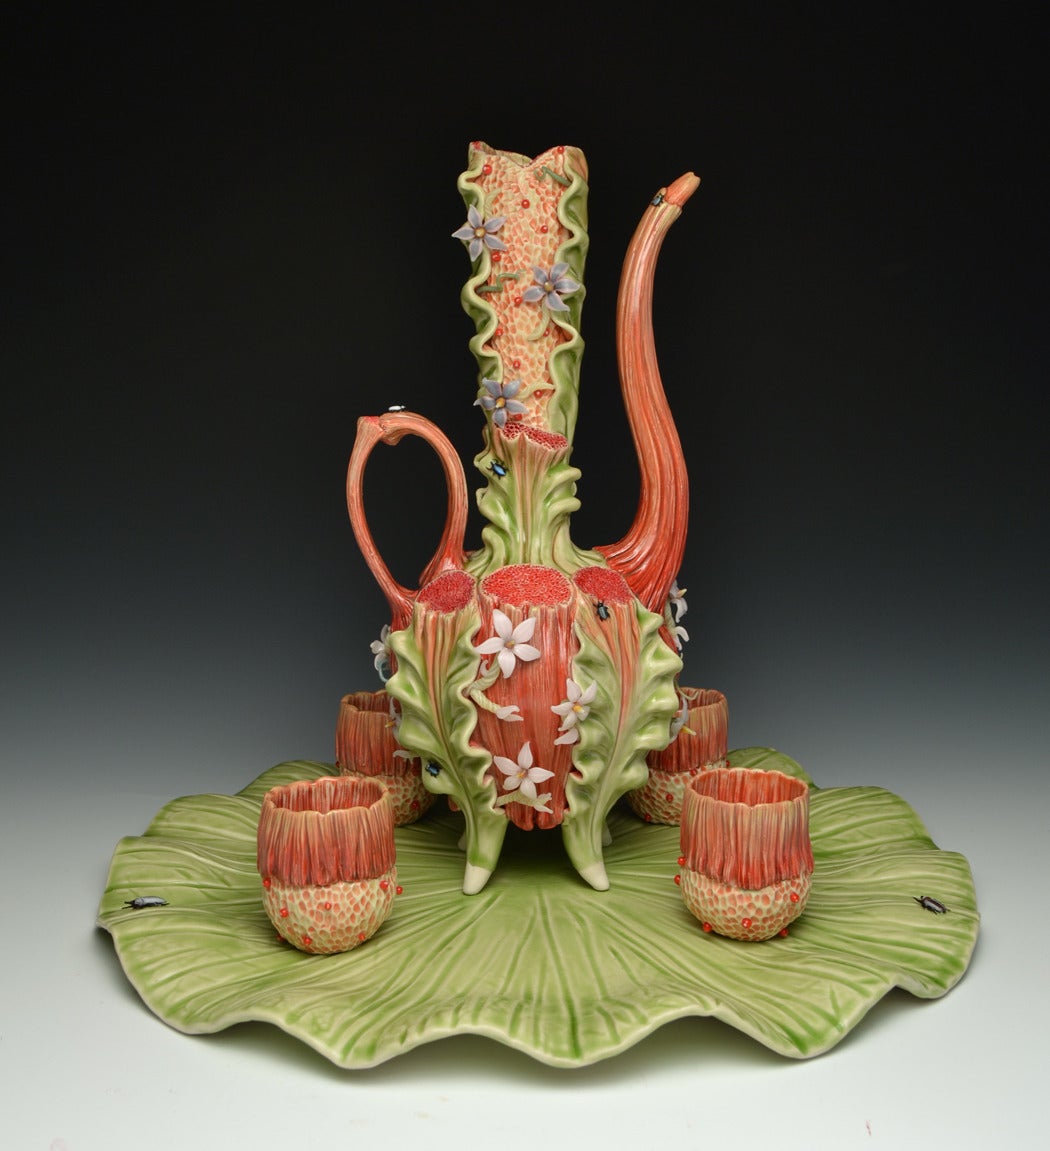 "Ewer with Tray and Cups", Porcelain Sculpture with Glass Detail - Mixed Media Art by Bonnie Seeman